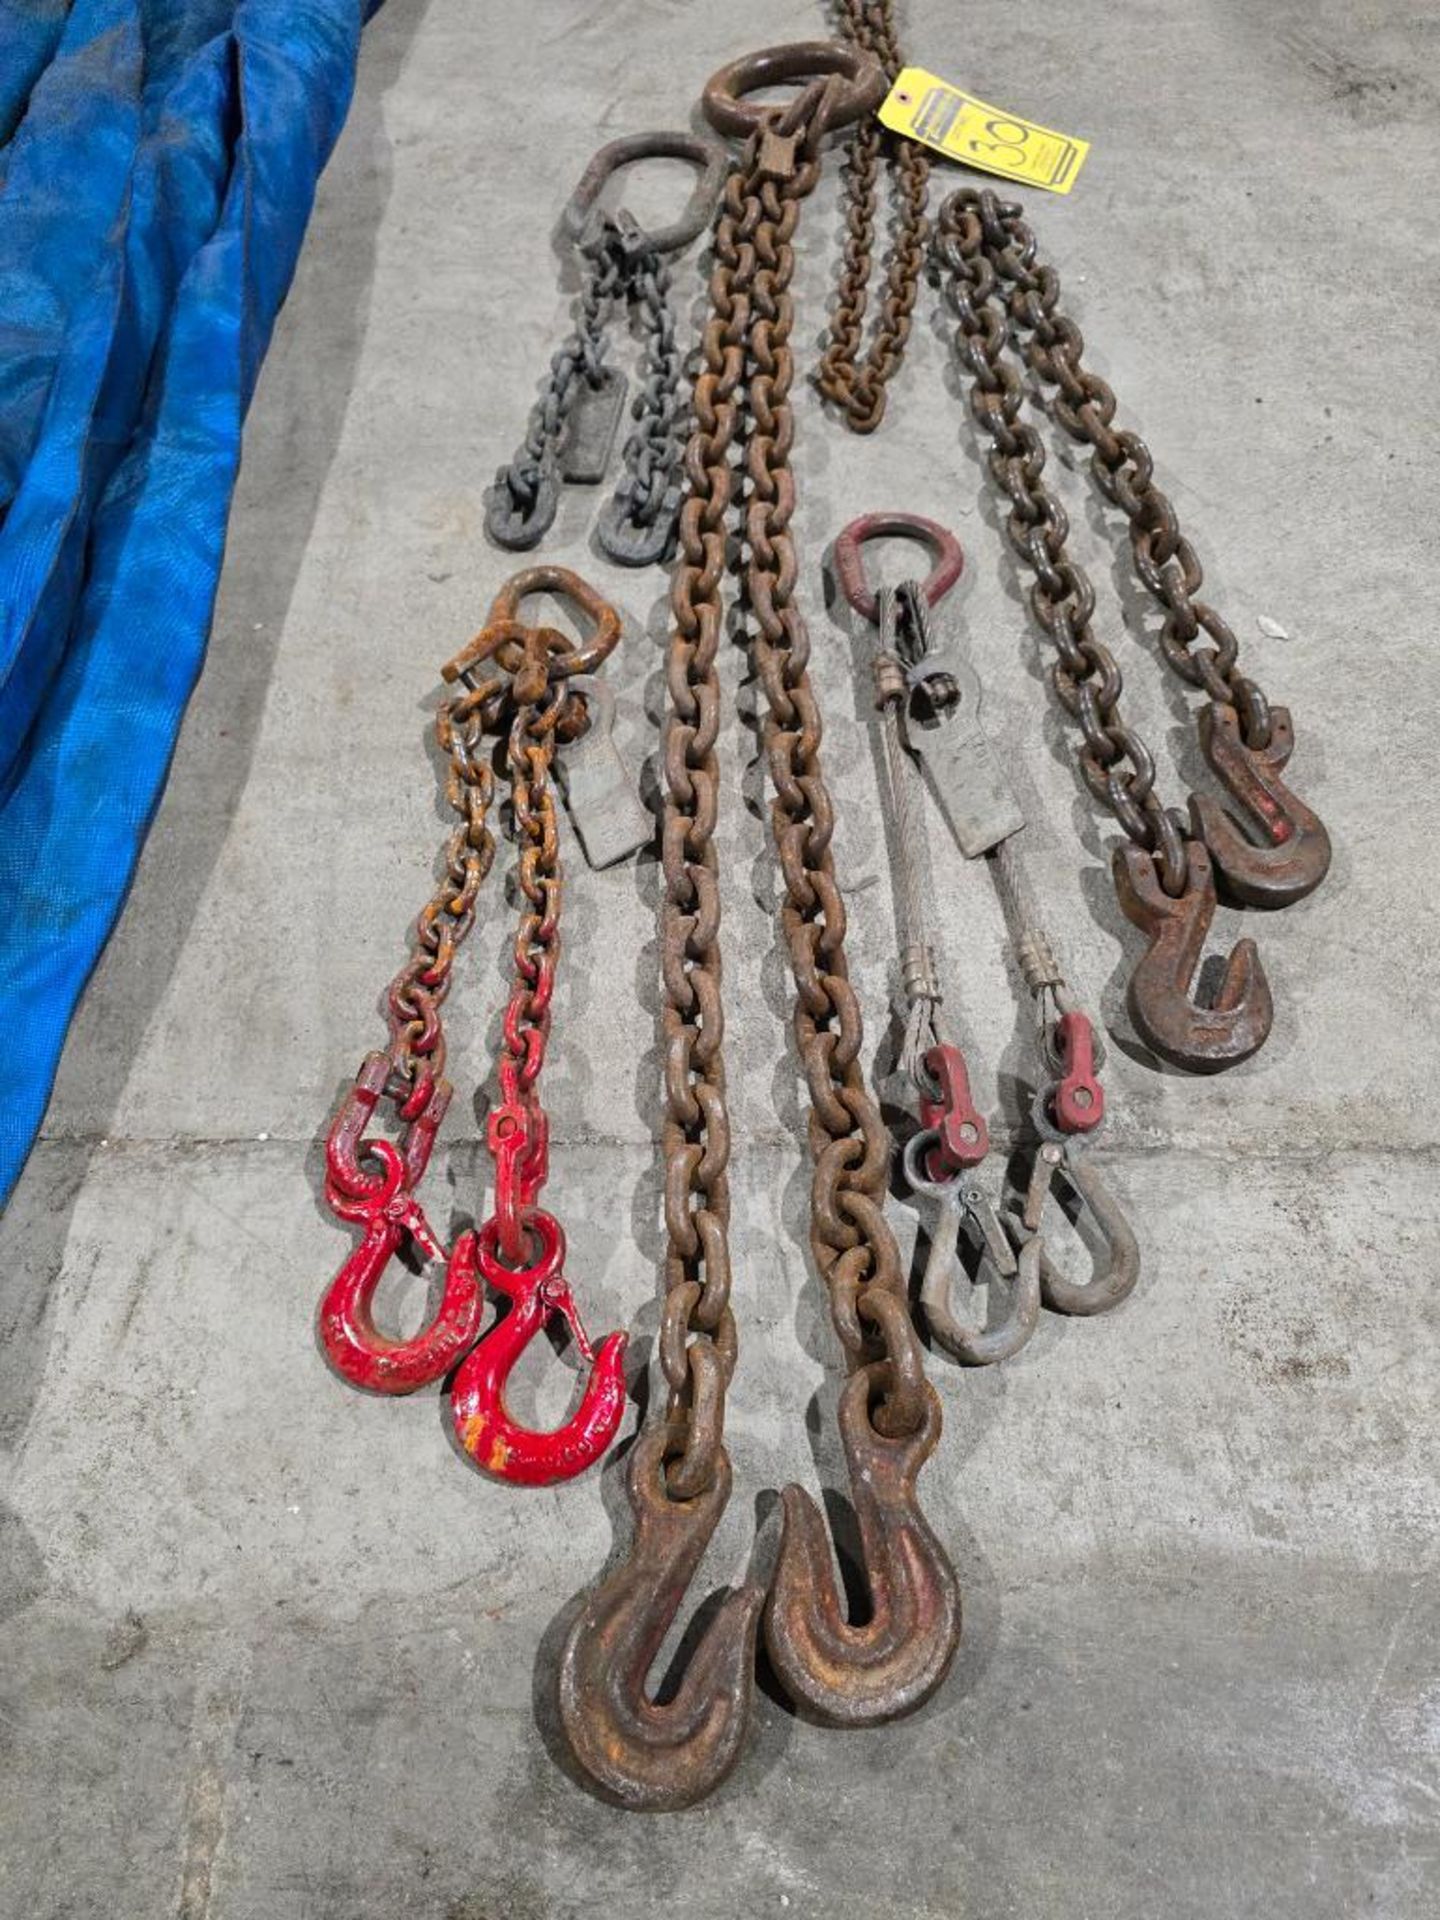 Leg Chains, Double Hook Chains, & Assorted Lifting Chain - Image 4 of 6